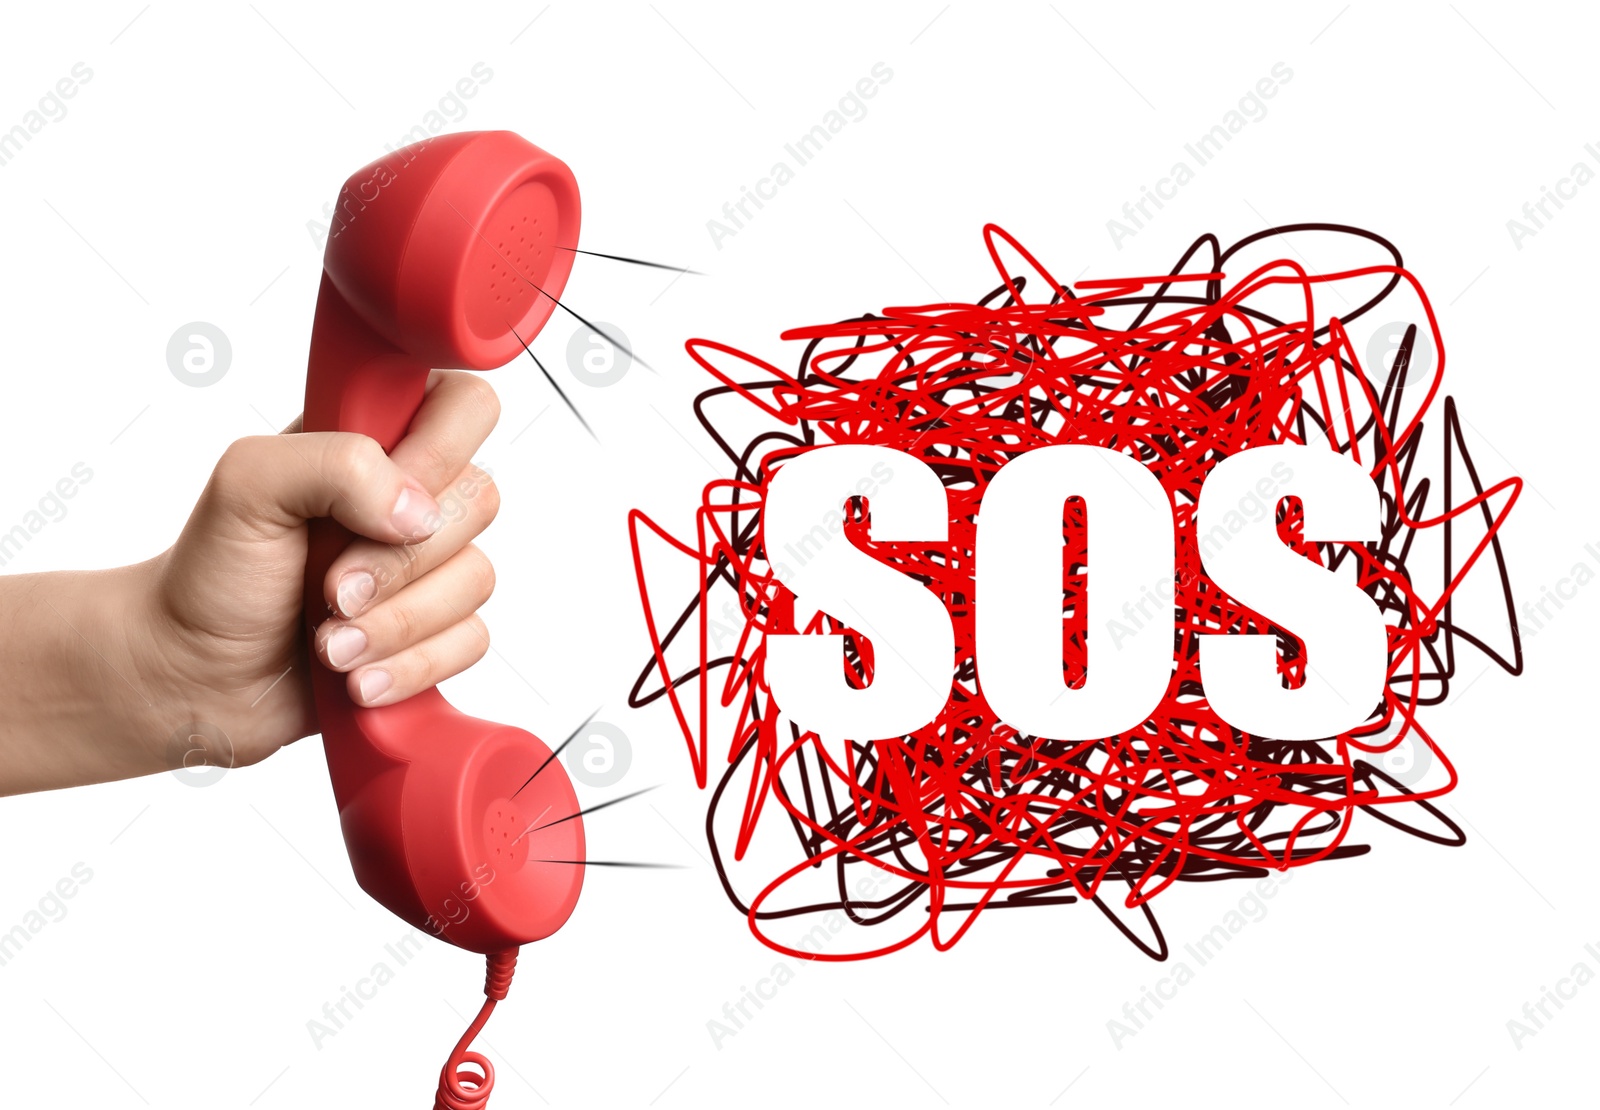 Image of Woman holding telephone handset on white background, closeup. Emergency SOS call